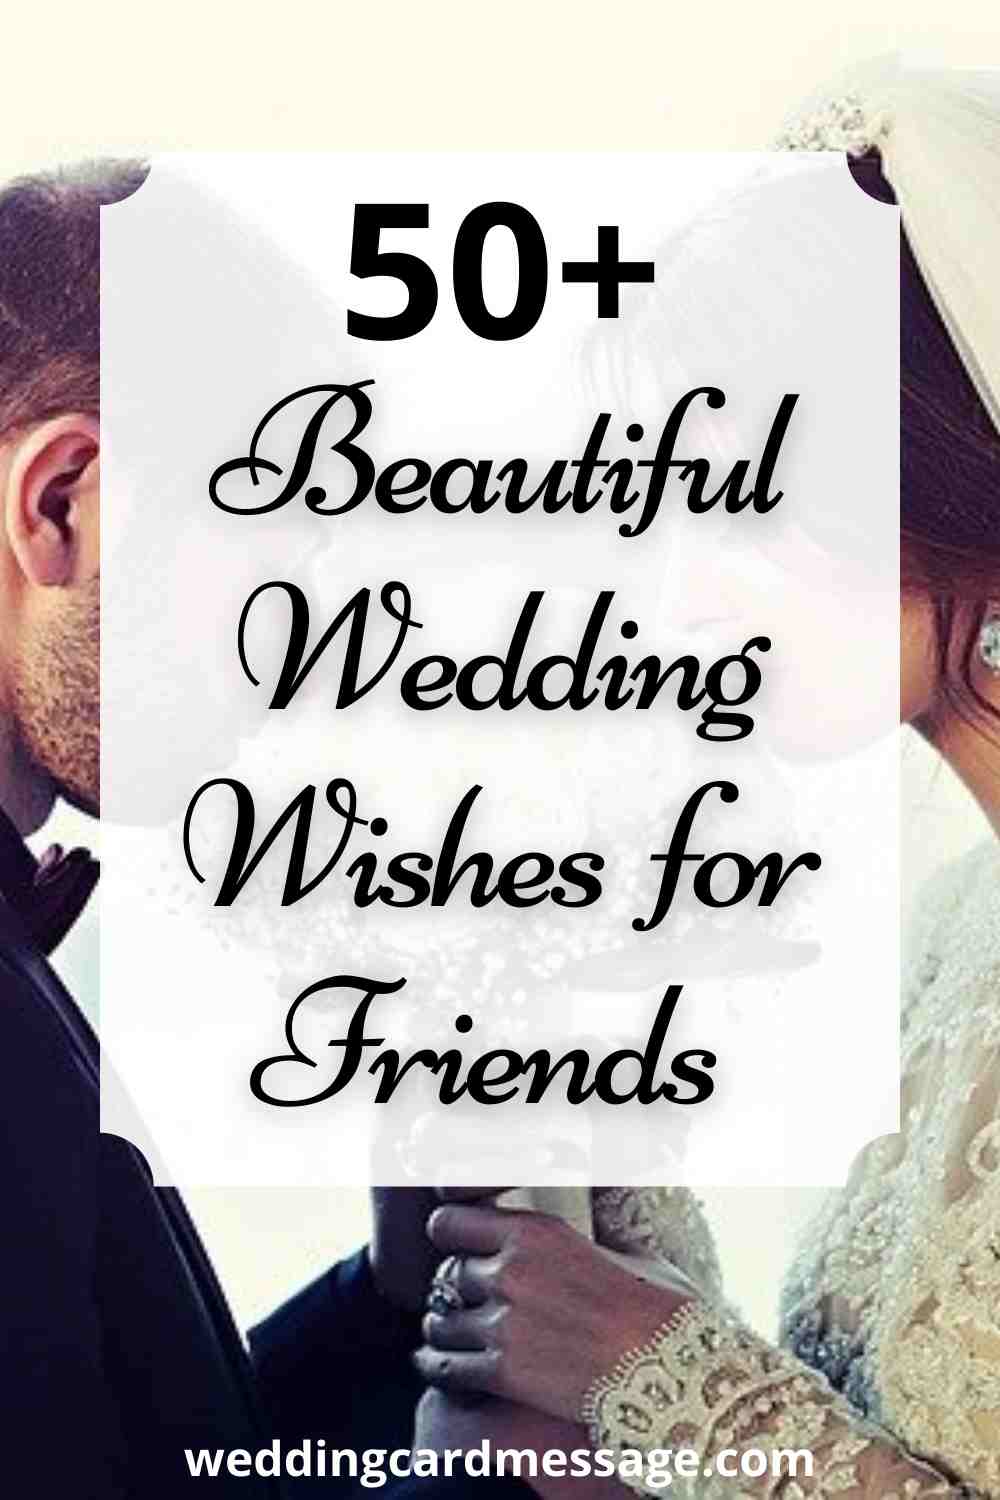 50+ Beautiful Wedding Wishes for Friends - Wedding Card Message